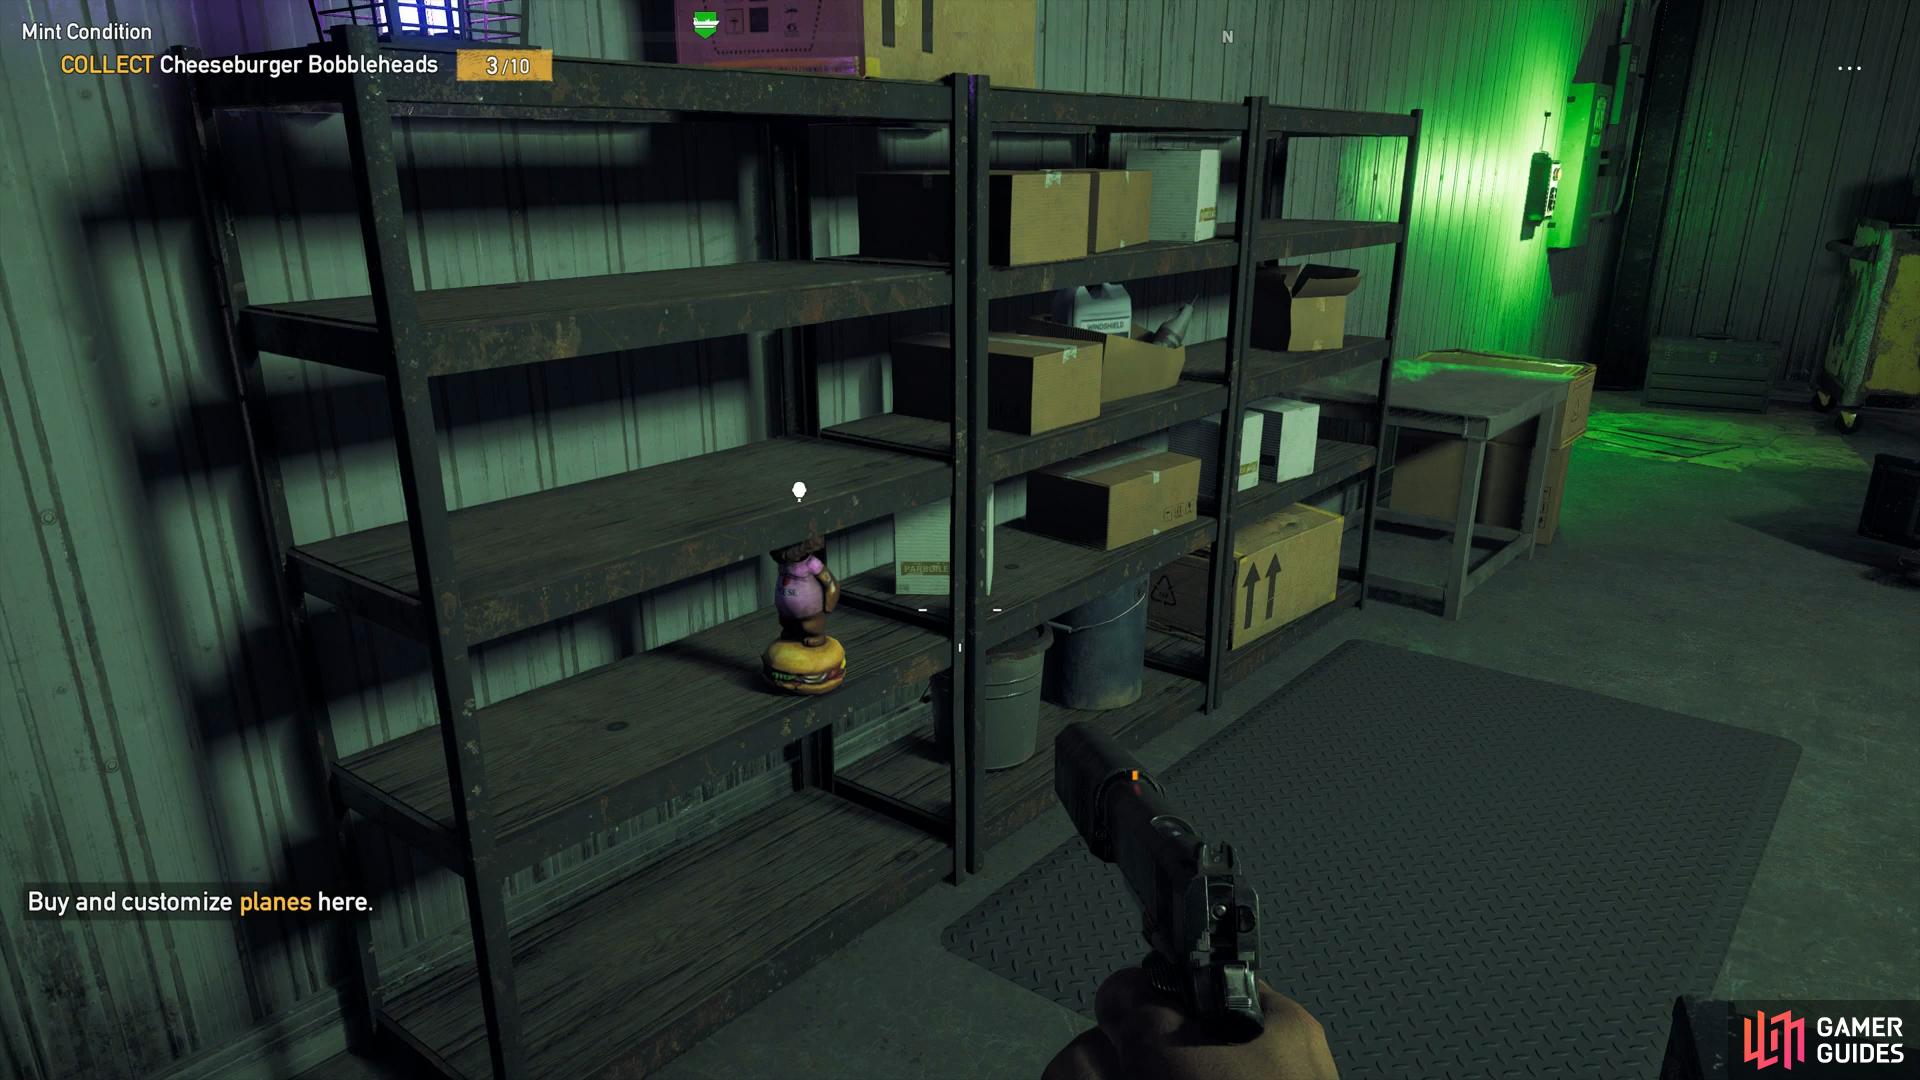 youll need to complete the Hangar Pains Prepper Stash to gain access to the Bobblehead.